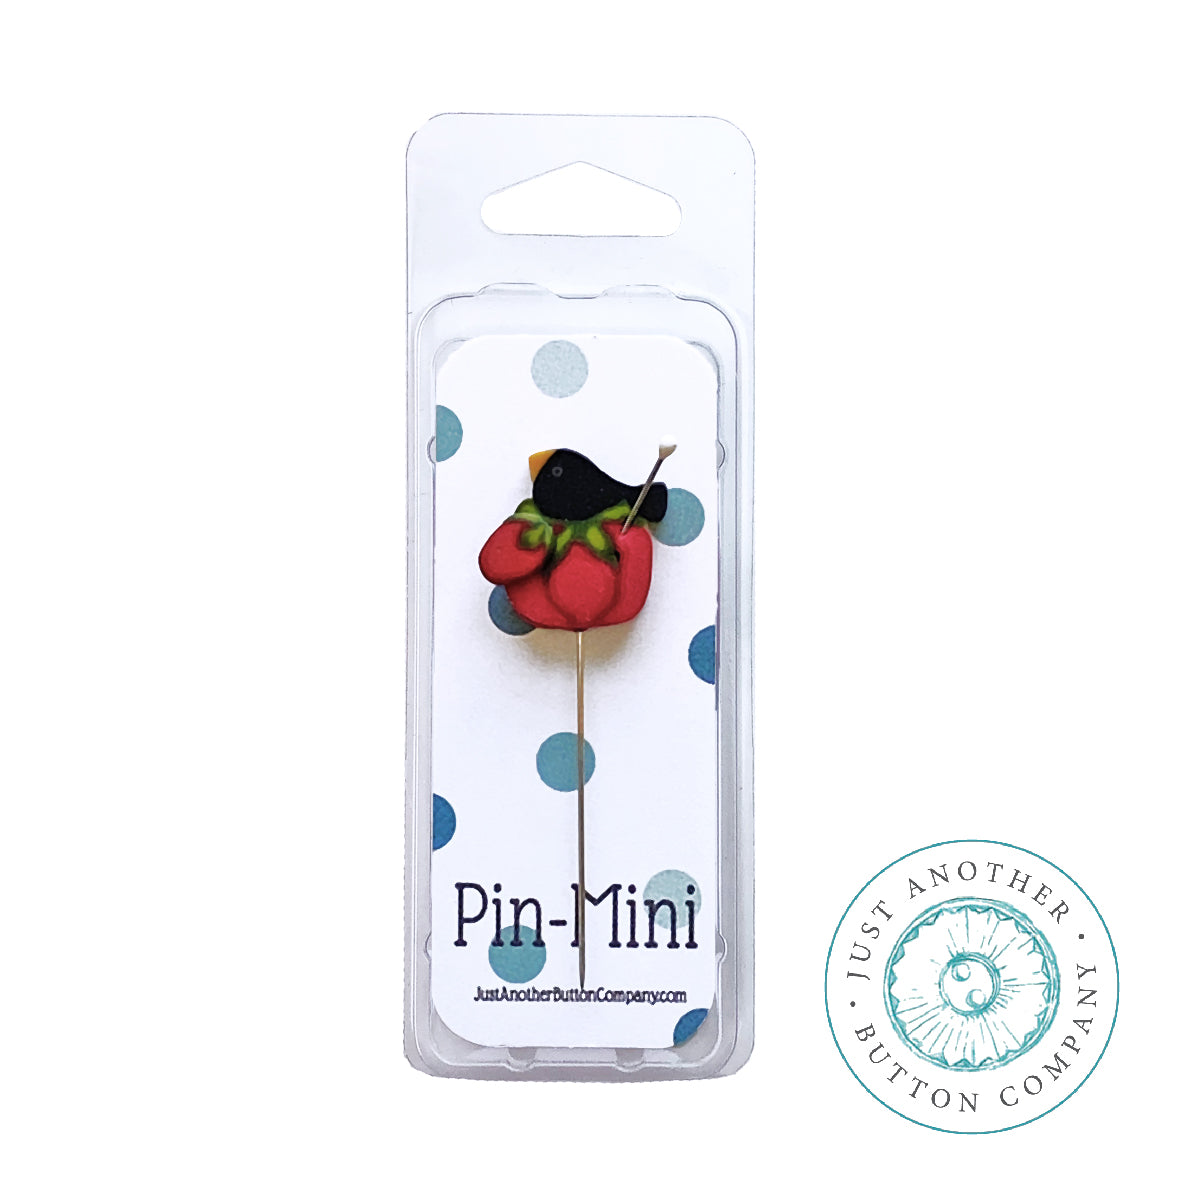 Pin-Mini: Sewing Bird Solo – Just Another Button Company